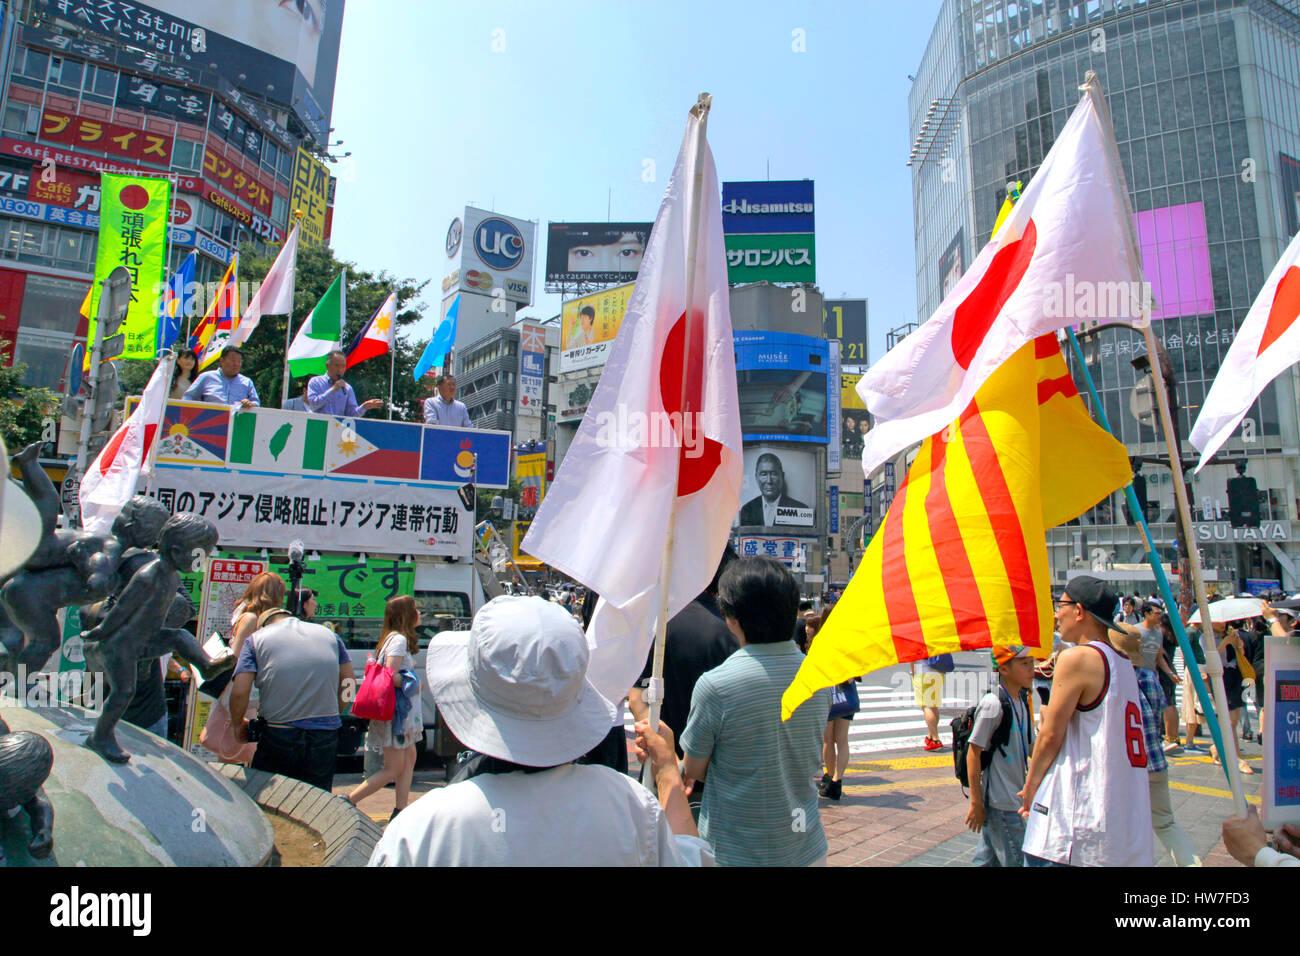 Protest Against Chinese Invasion of South East Asia in Shibuya Tokyo Japan Stock Photo